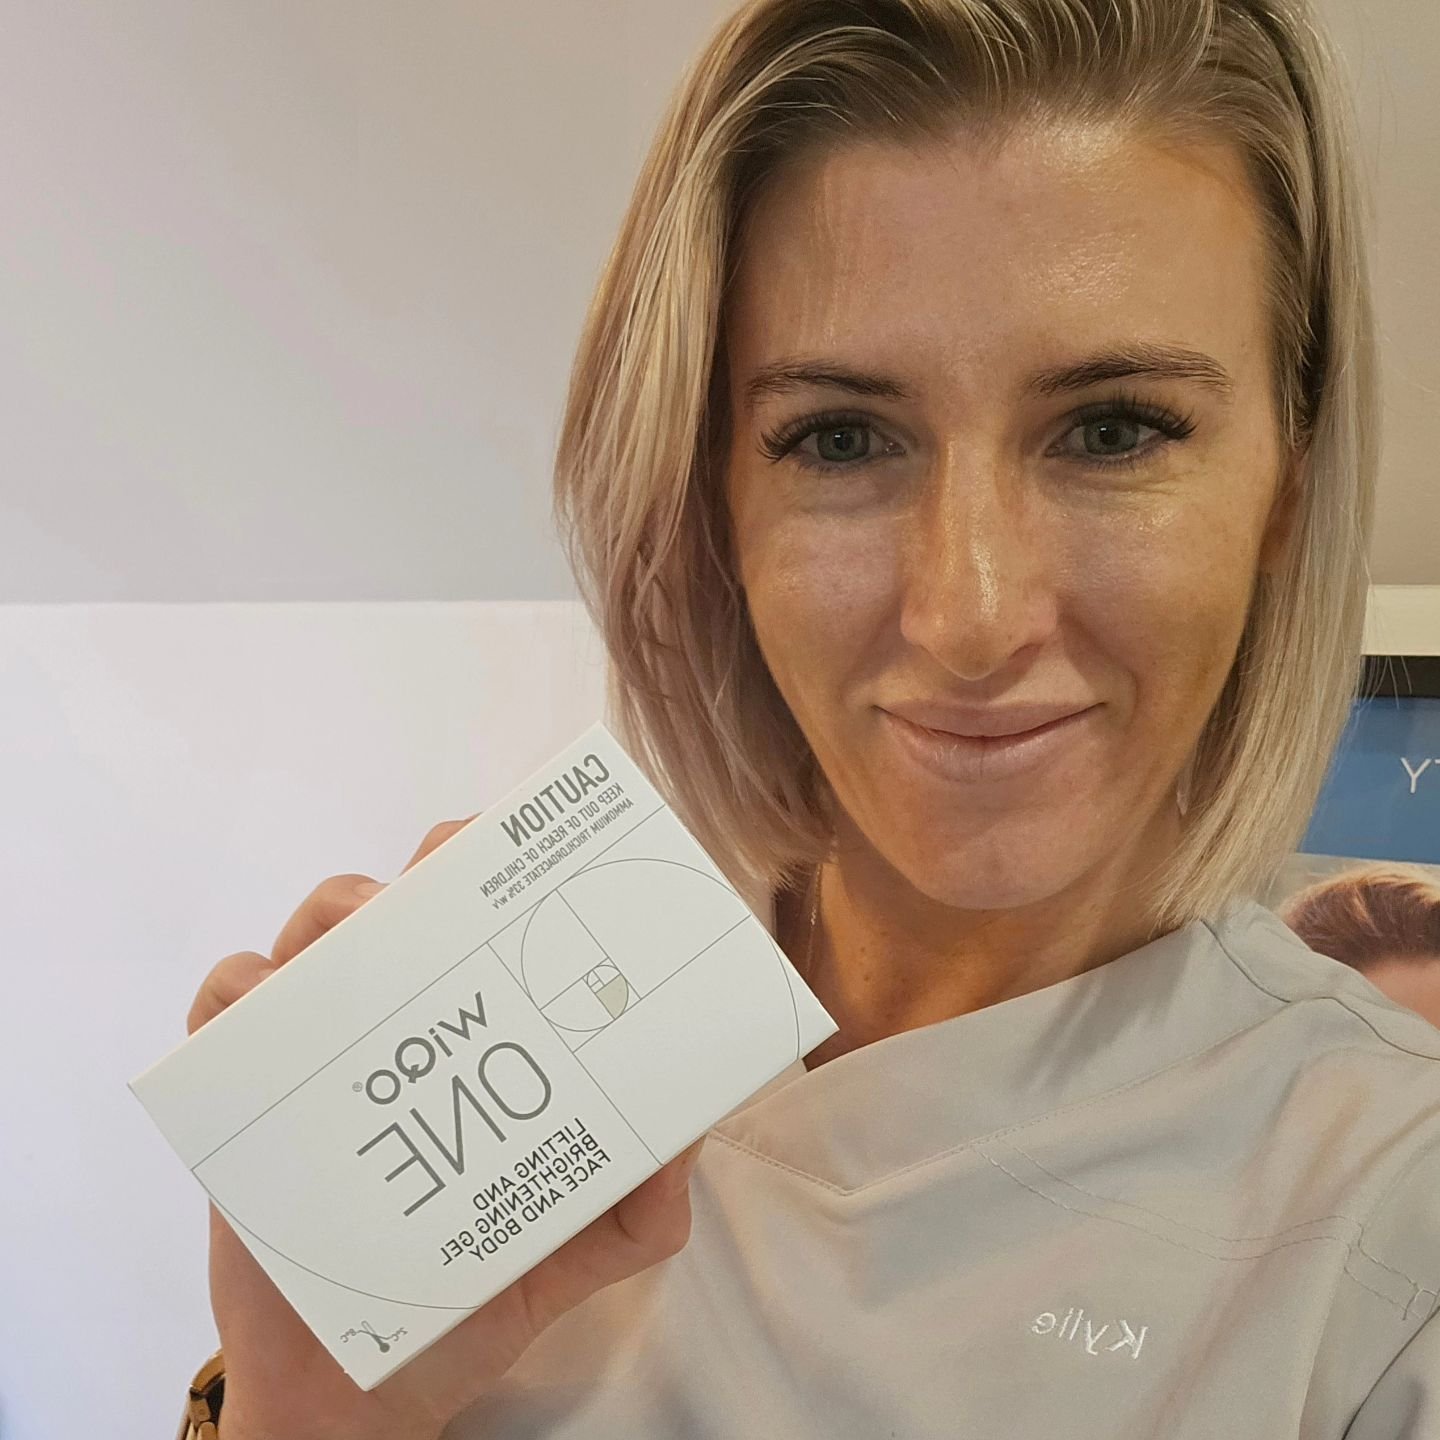 There are lots of newbies here, so I thought I'd drop a line!

👋 Hiya! Kylie here. I'm absolutely everything behind my skin clinic.

I have been at this for 19 years now, biz owner for 4.
On occasion and part of my future is connecting with @advance